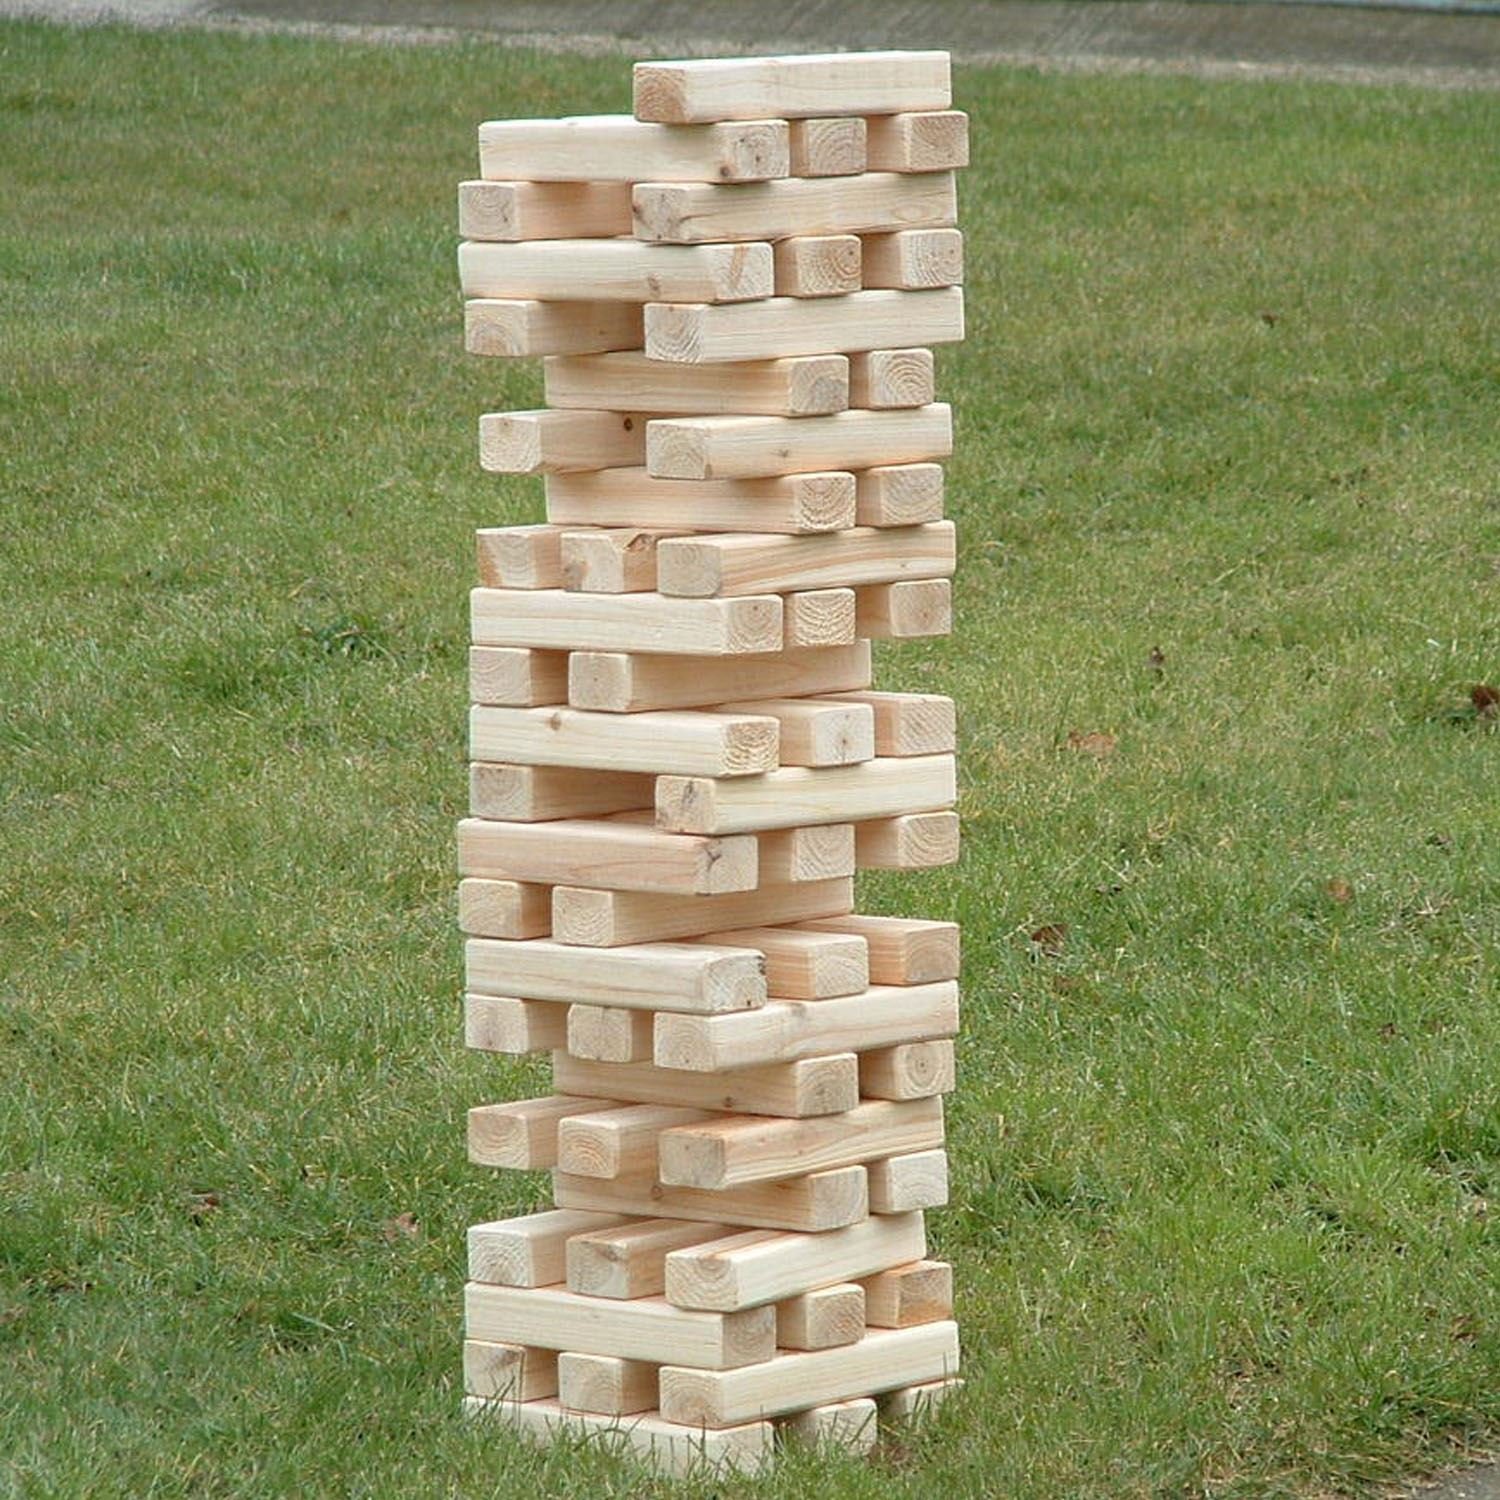 This is a Giant Jenga Rental